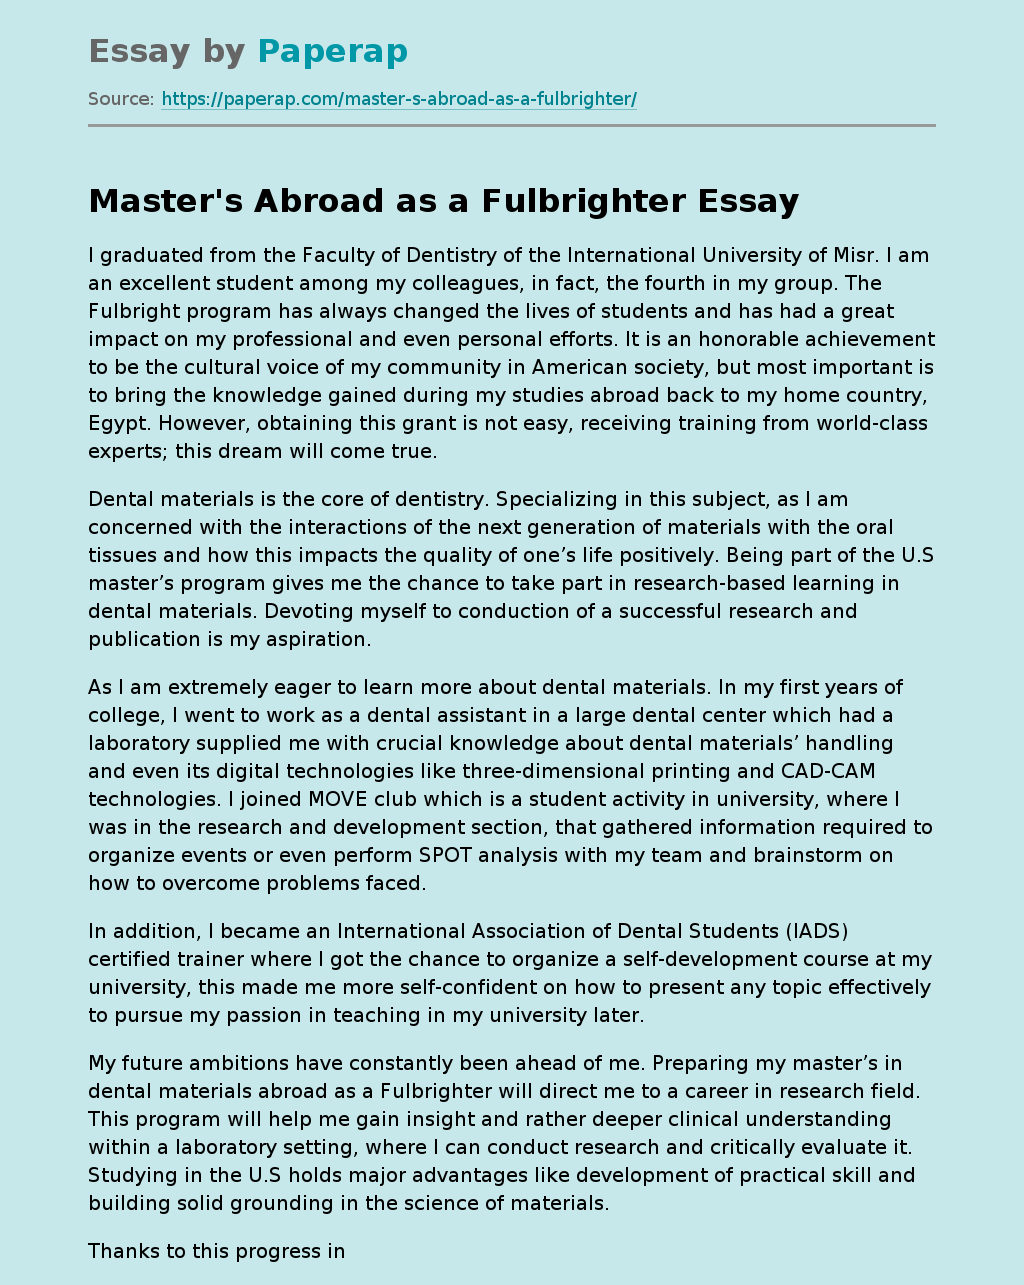 Master's Abroad as a Fulbrighter